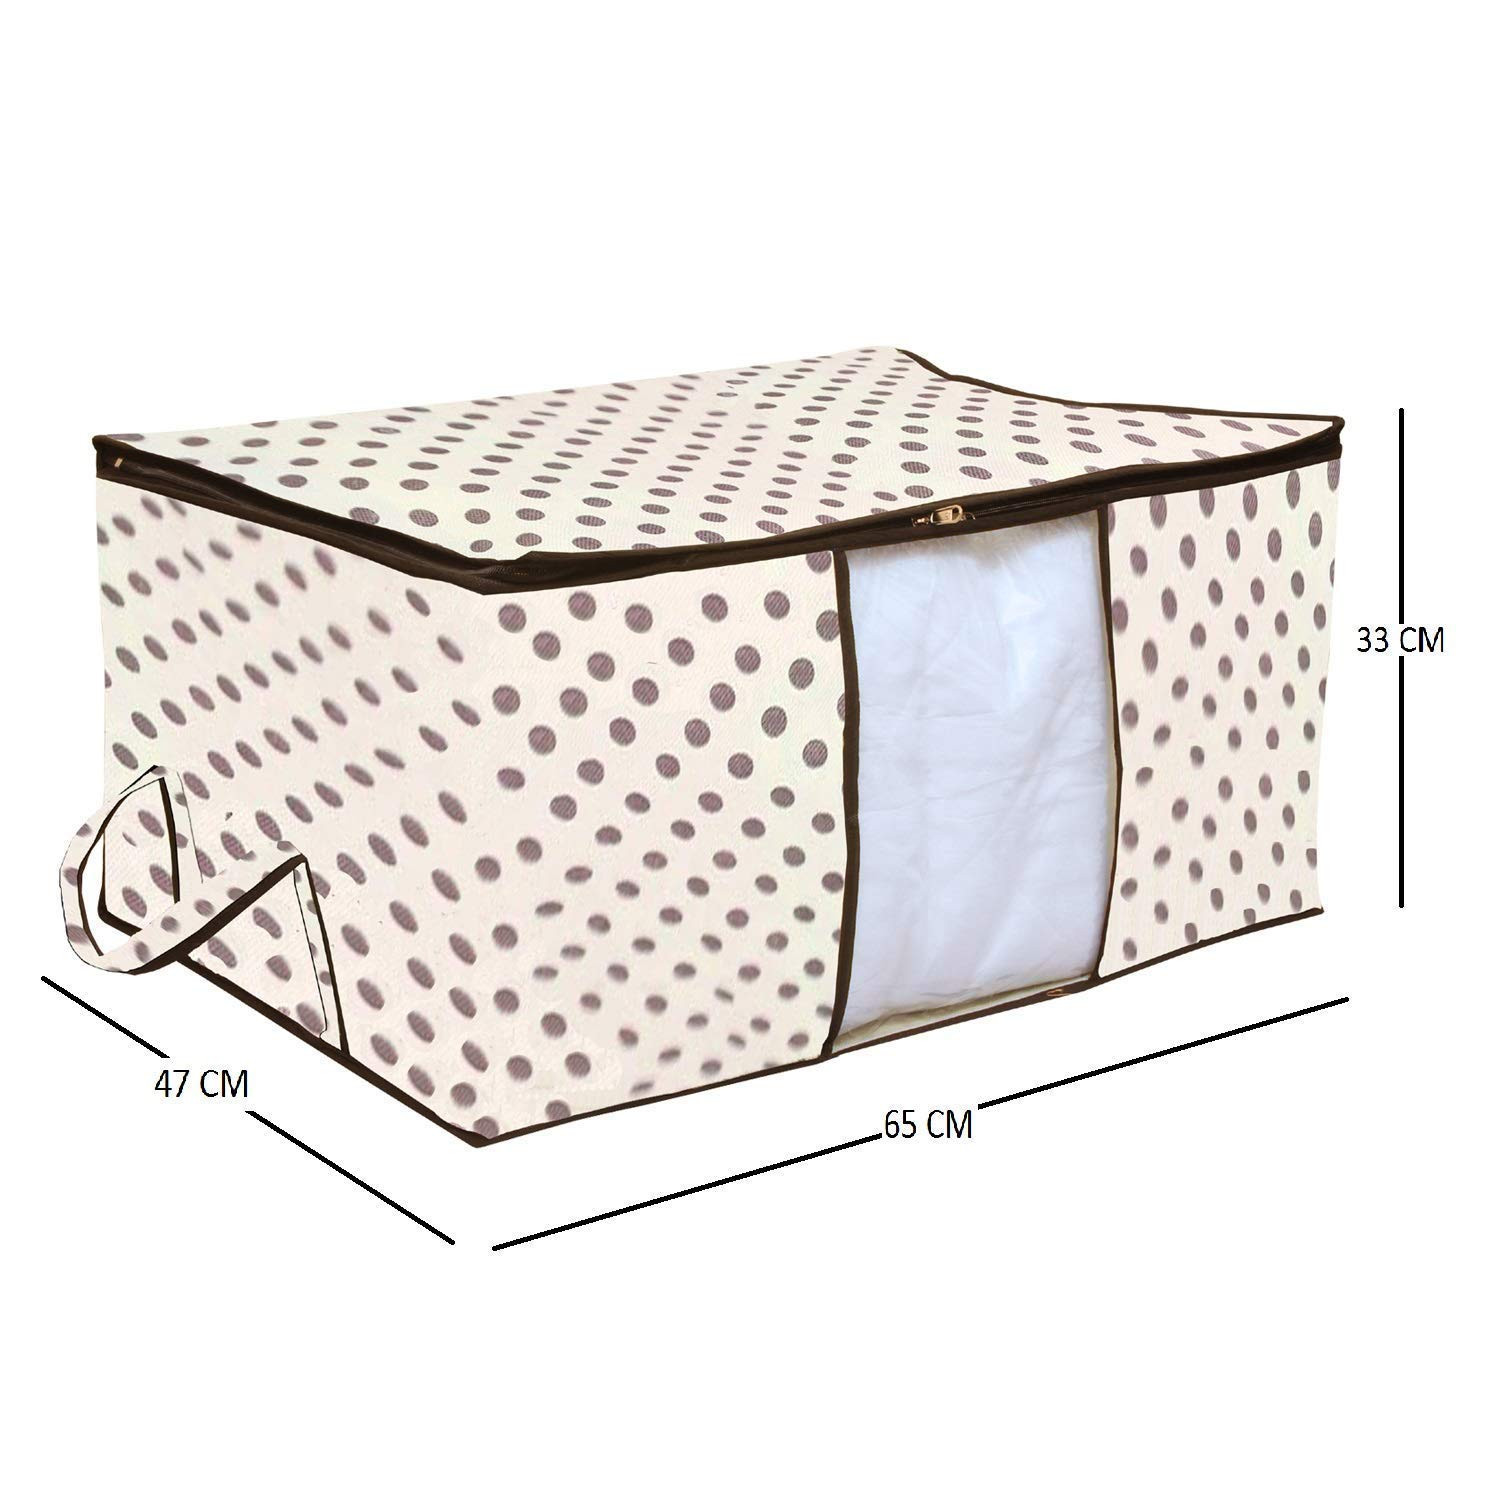 Kuber Industries Polka Dots Printed Non Woven Saree Cover And Underbed Storage Bag, Cloth Organizer For Storage, Blanket Cover Combo Set (Ivory) -CTKTC38643